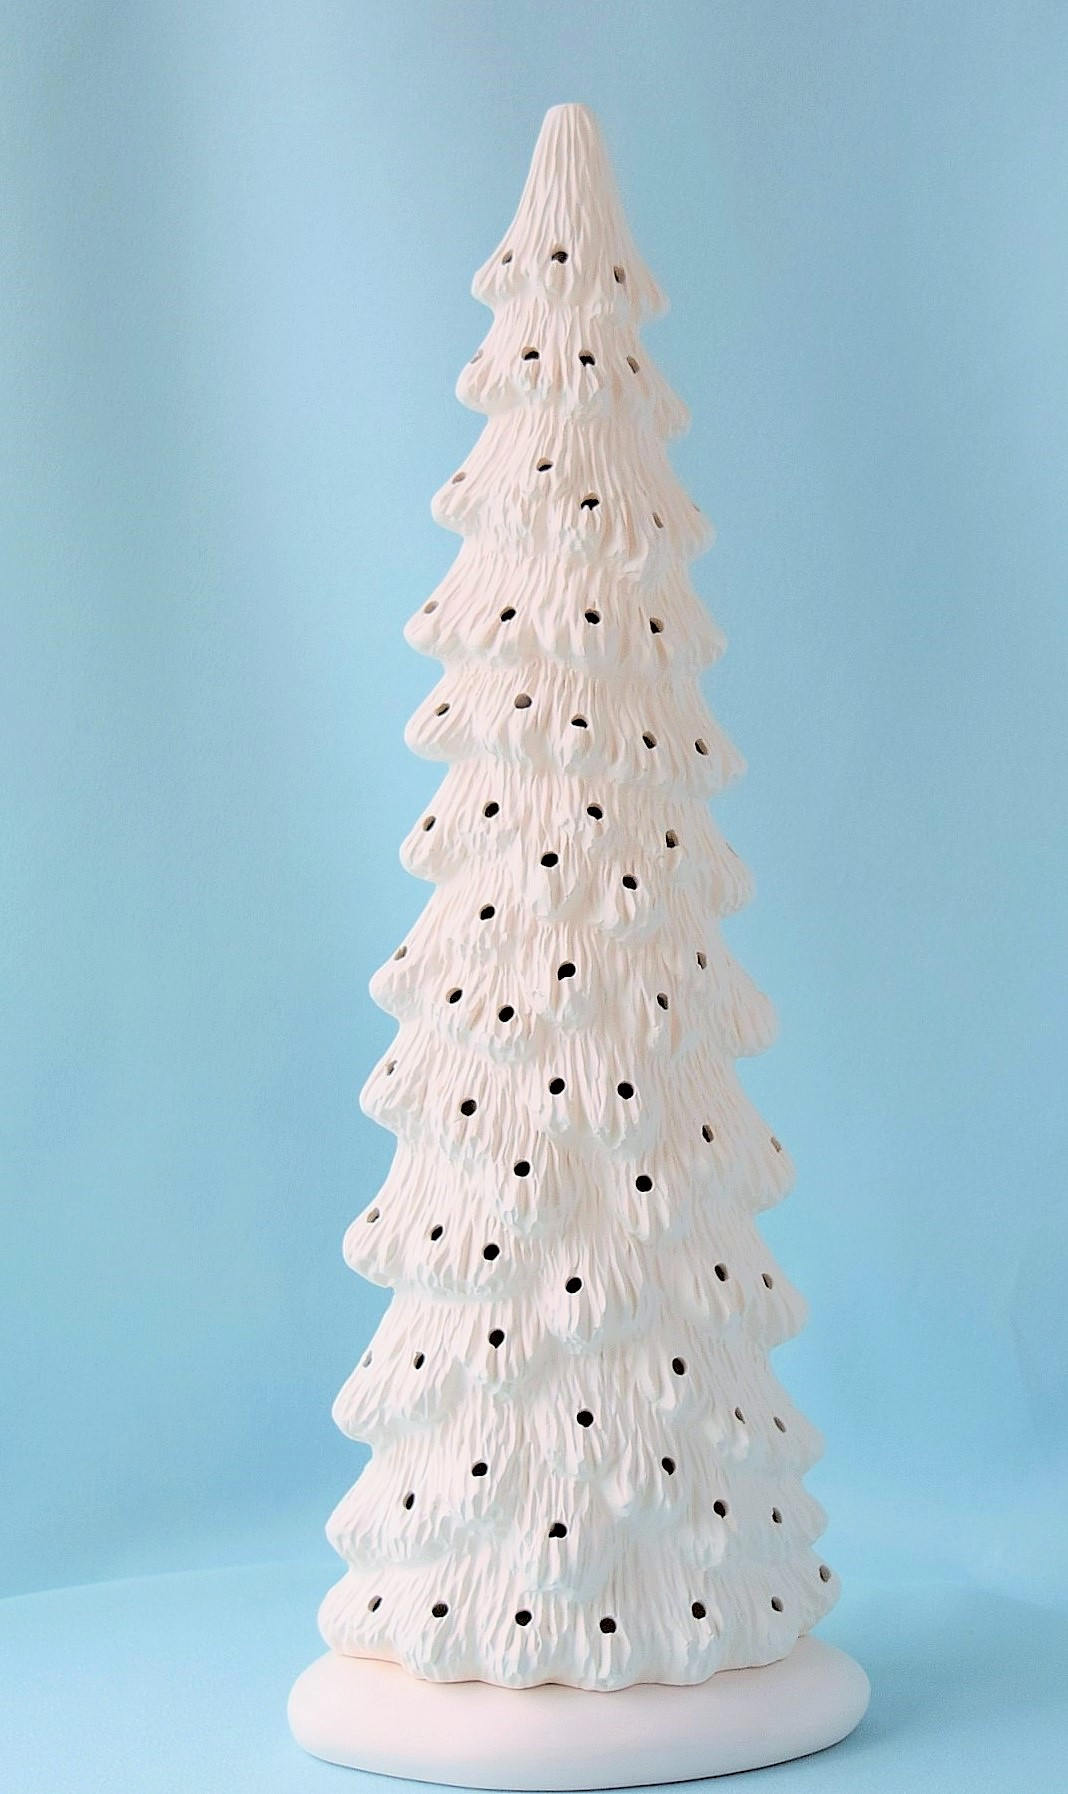 Ceramic Christmas tree in bisque - Slim Christmas Tree - 16 inches tall - village -  Tree - Ready to paint - Painting project - DIY ceramics